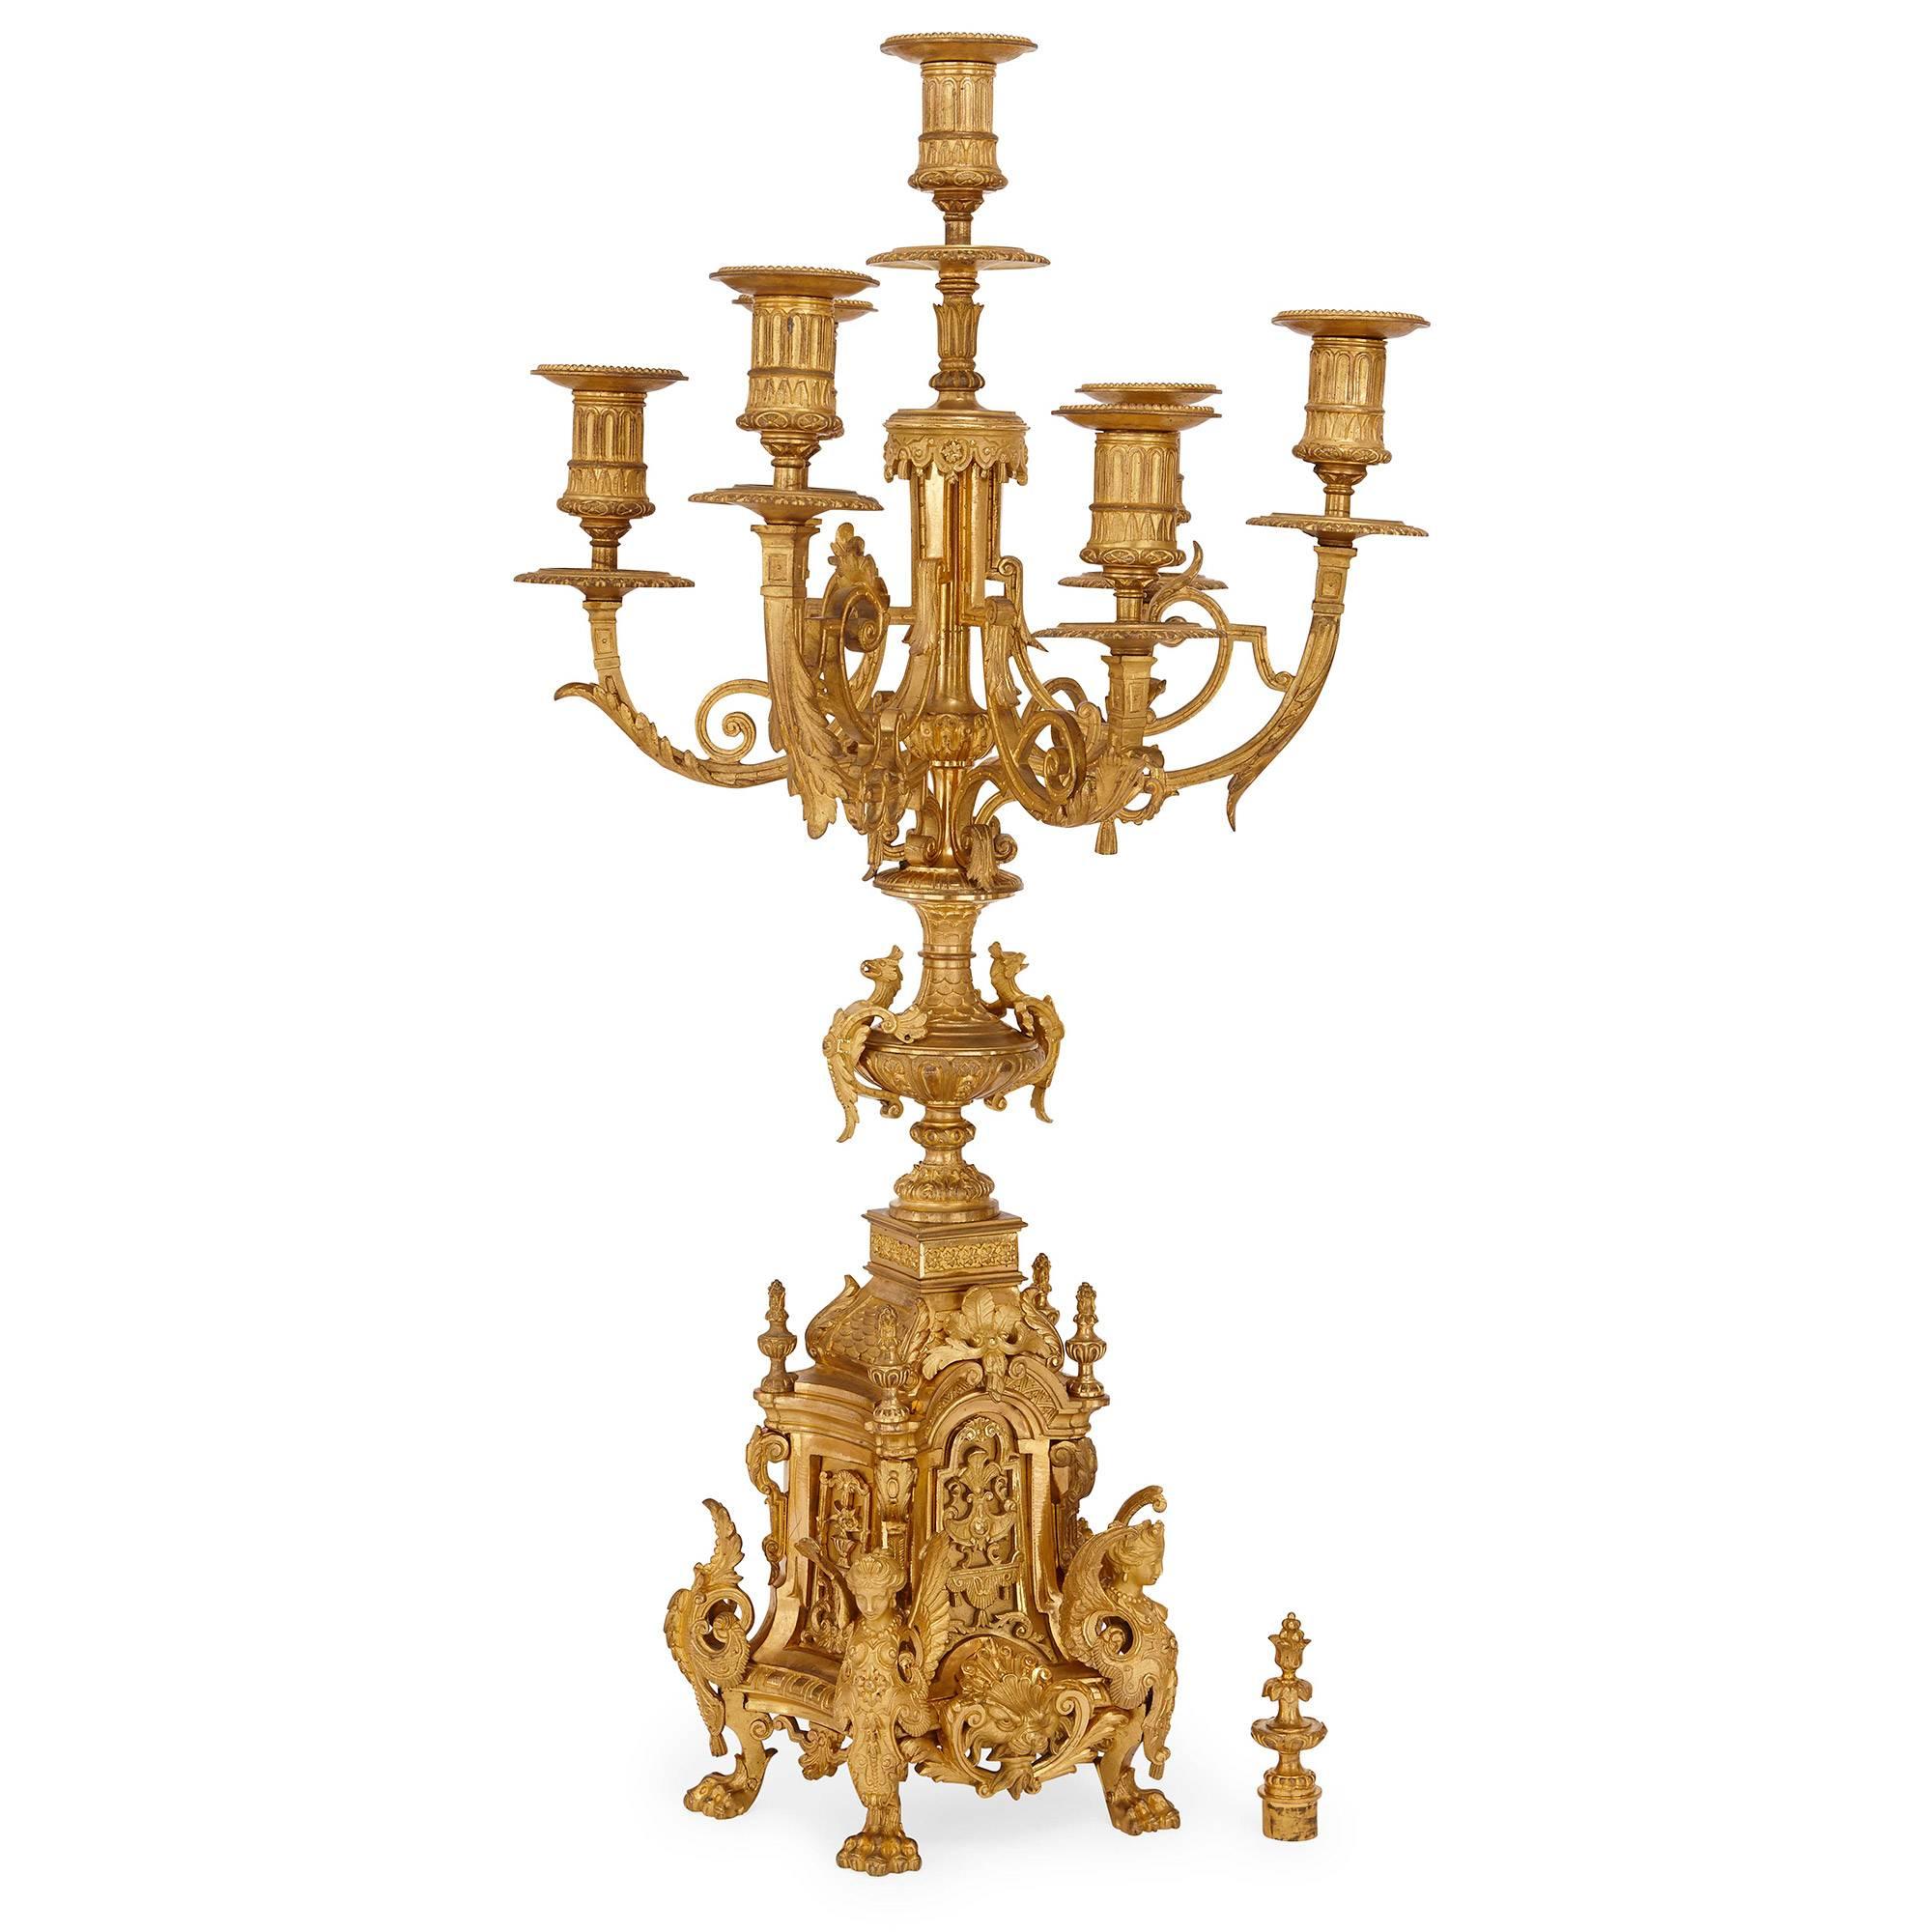 This monumental antique French clock set is composed of a central clock and a pair of flanking candelabra. The clock itself features a large central gilt bronze dial inset with enamel plaques with the Roman numerals and inscribed 'H. Jondet / 147.